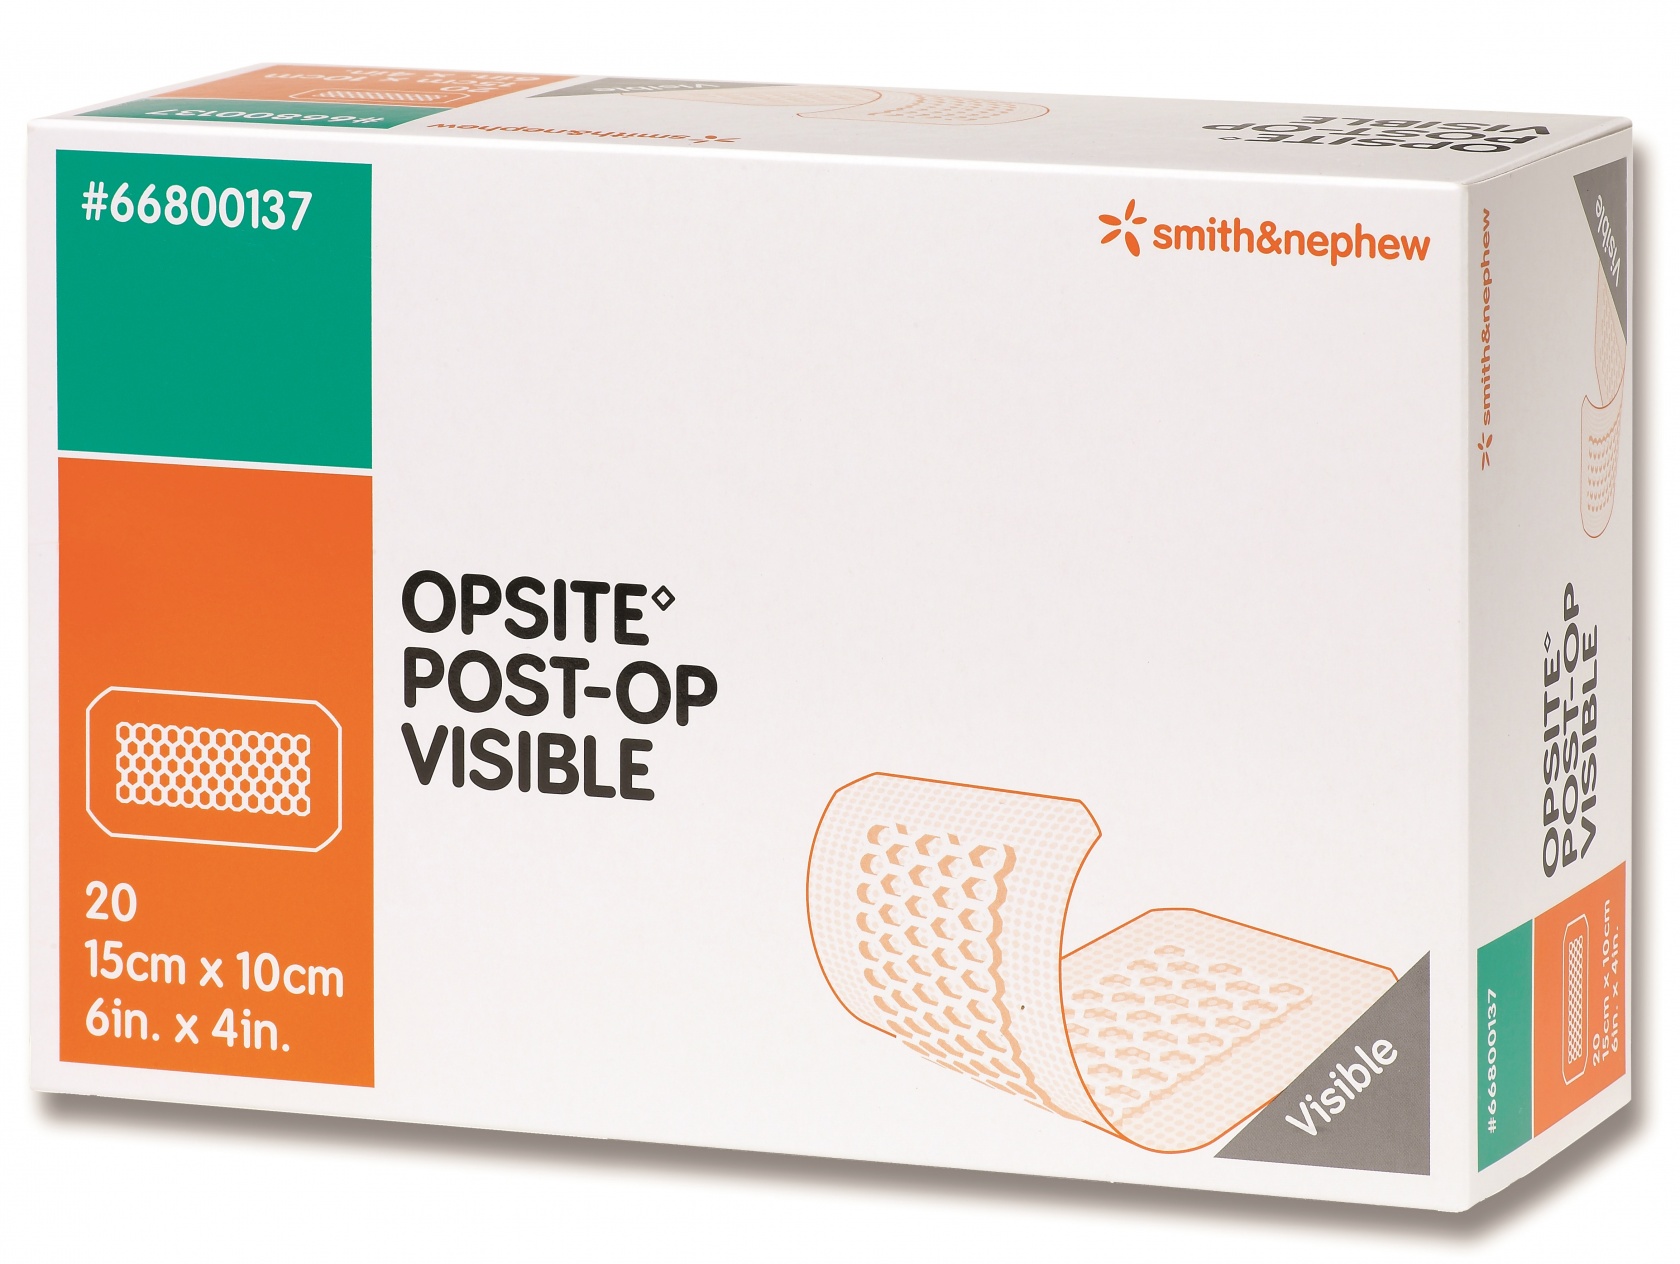 Opsite Post-Op Visible Dressing 8cm x 10cm